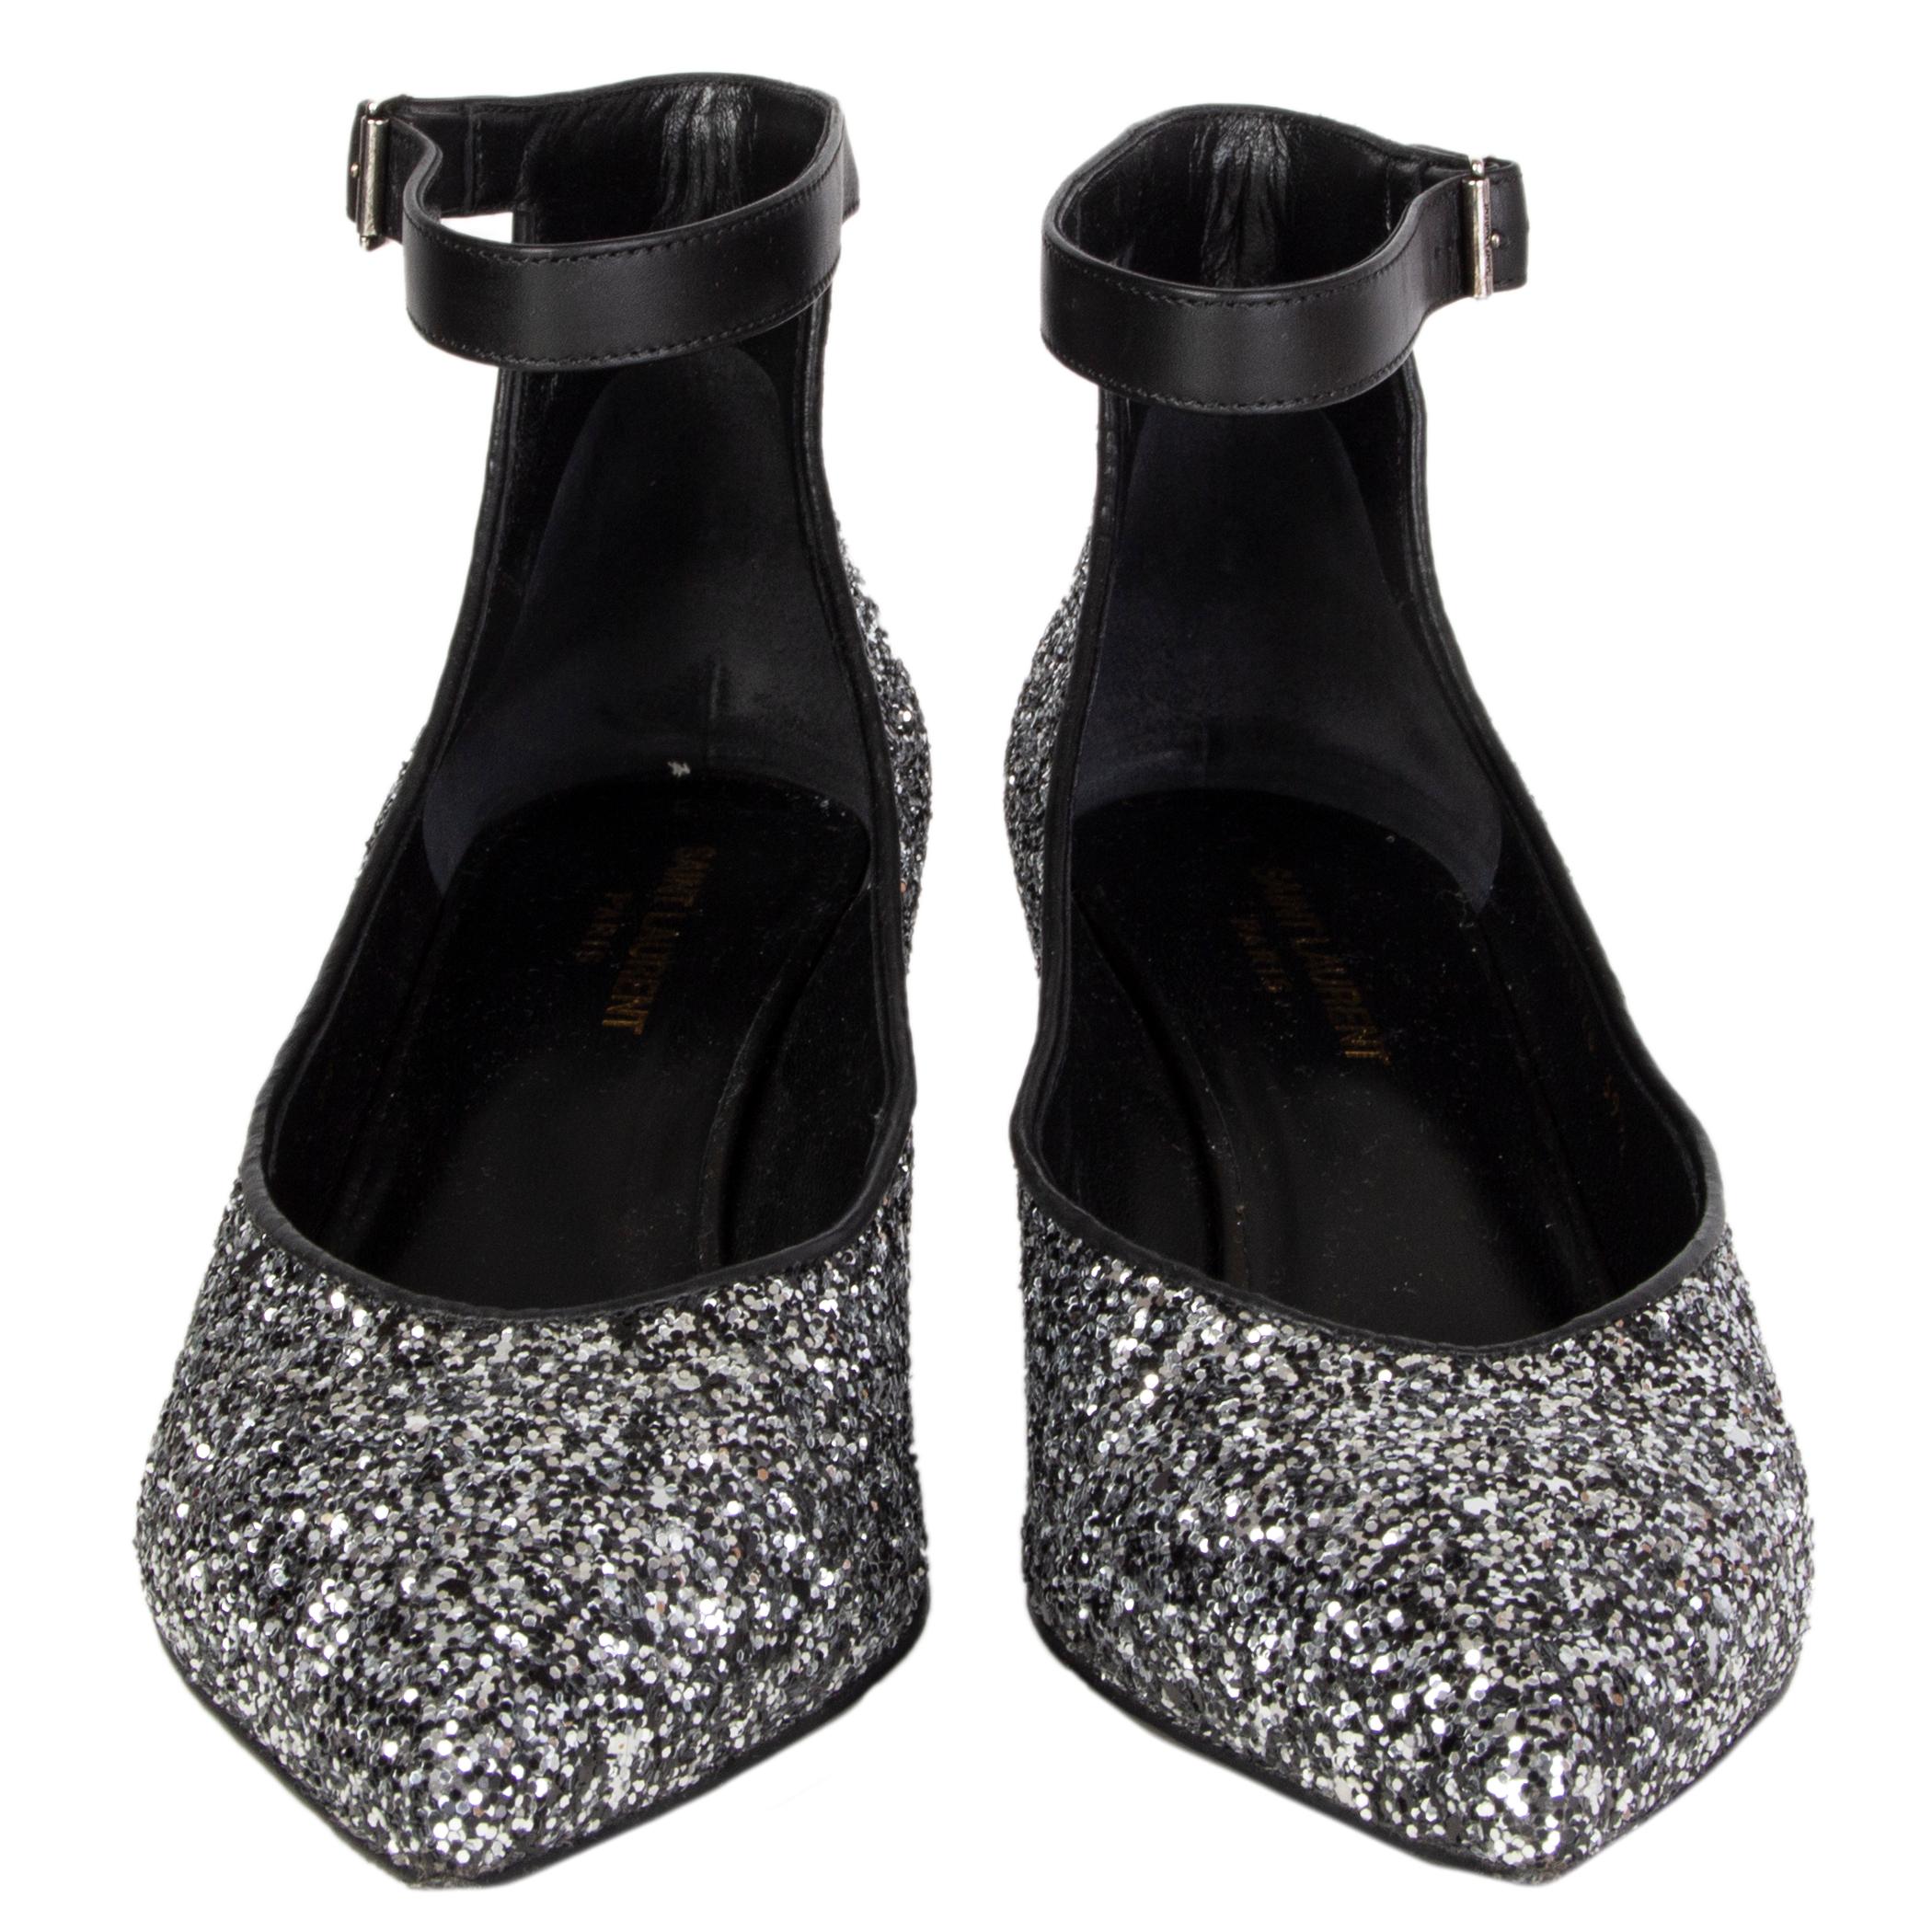 100% authentic Saint Laurent pointed-toe kitten heel silver glitter pumps with ankle strap closure. Have been worn and are in excellent condition. Come with dust bag.

Measurements
Imprinted Size	39.5  (run small(
Shoe Size	39
Inside Sole	26cm